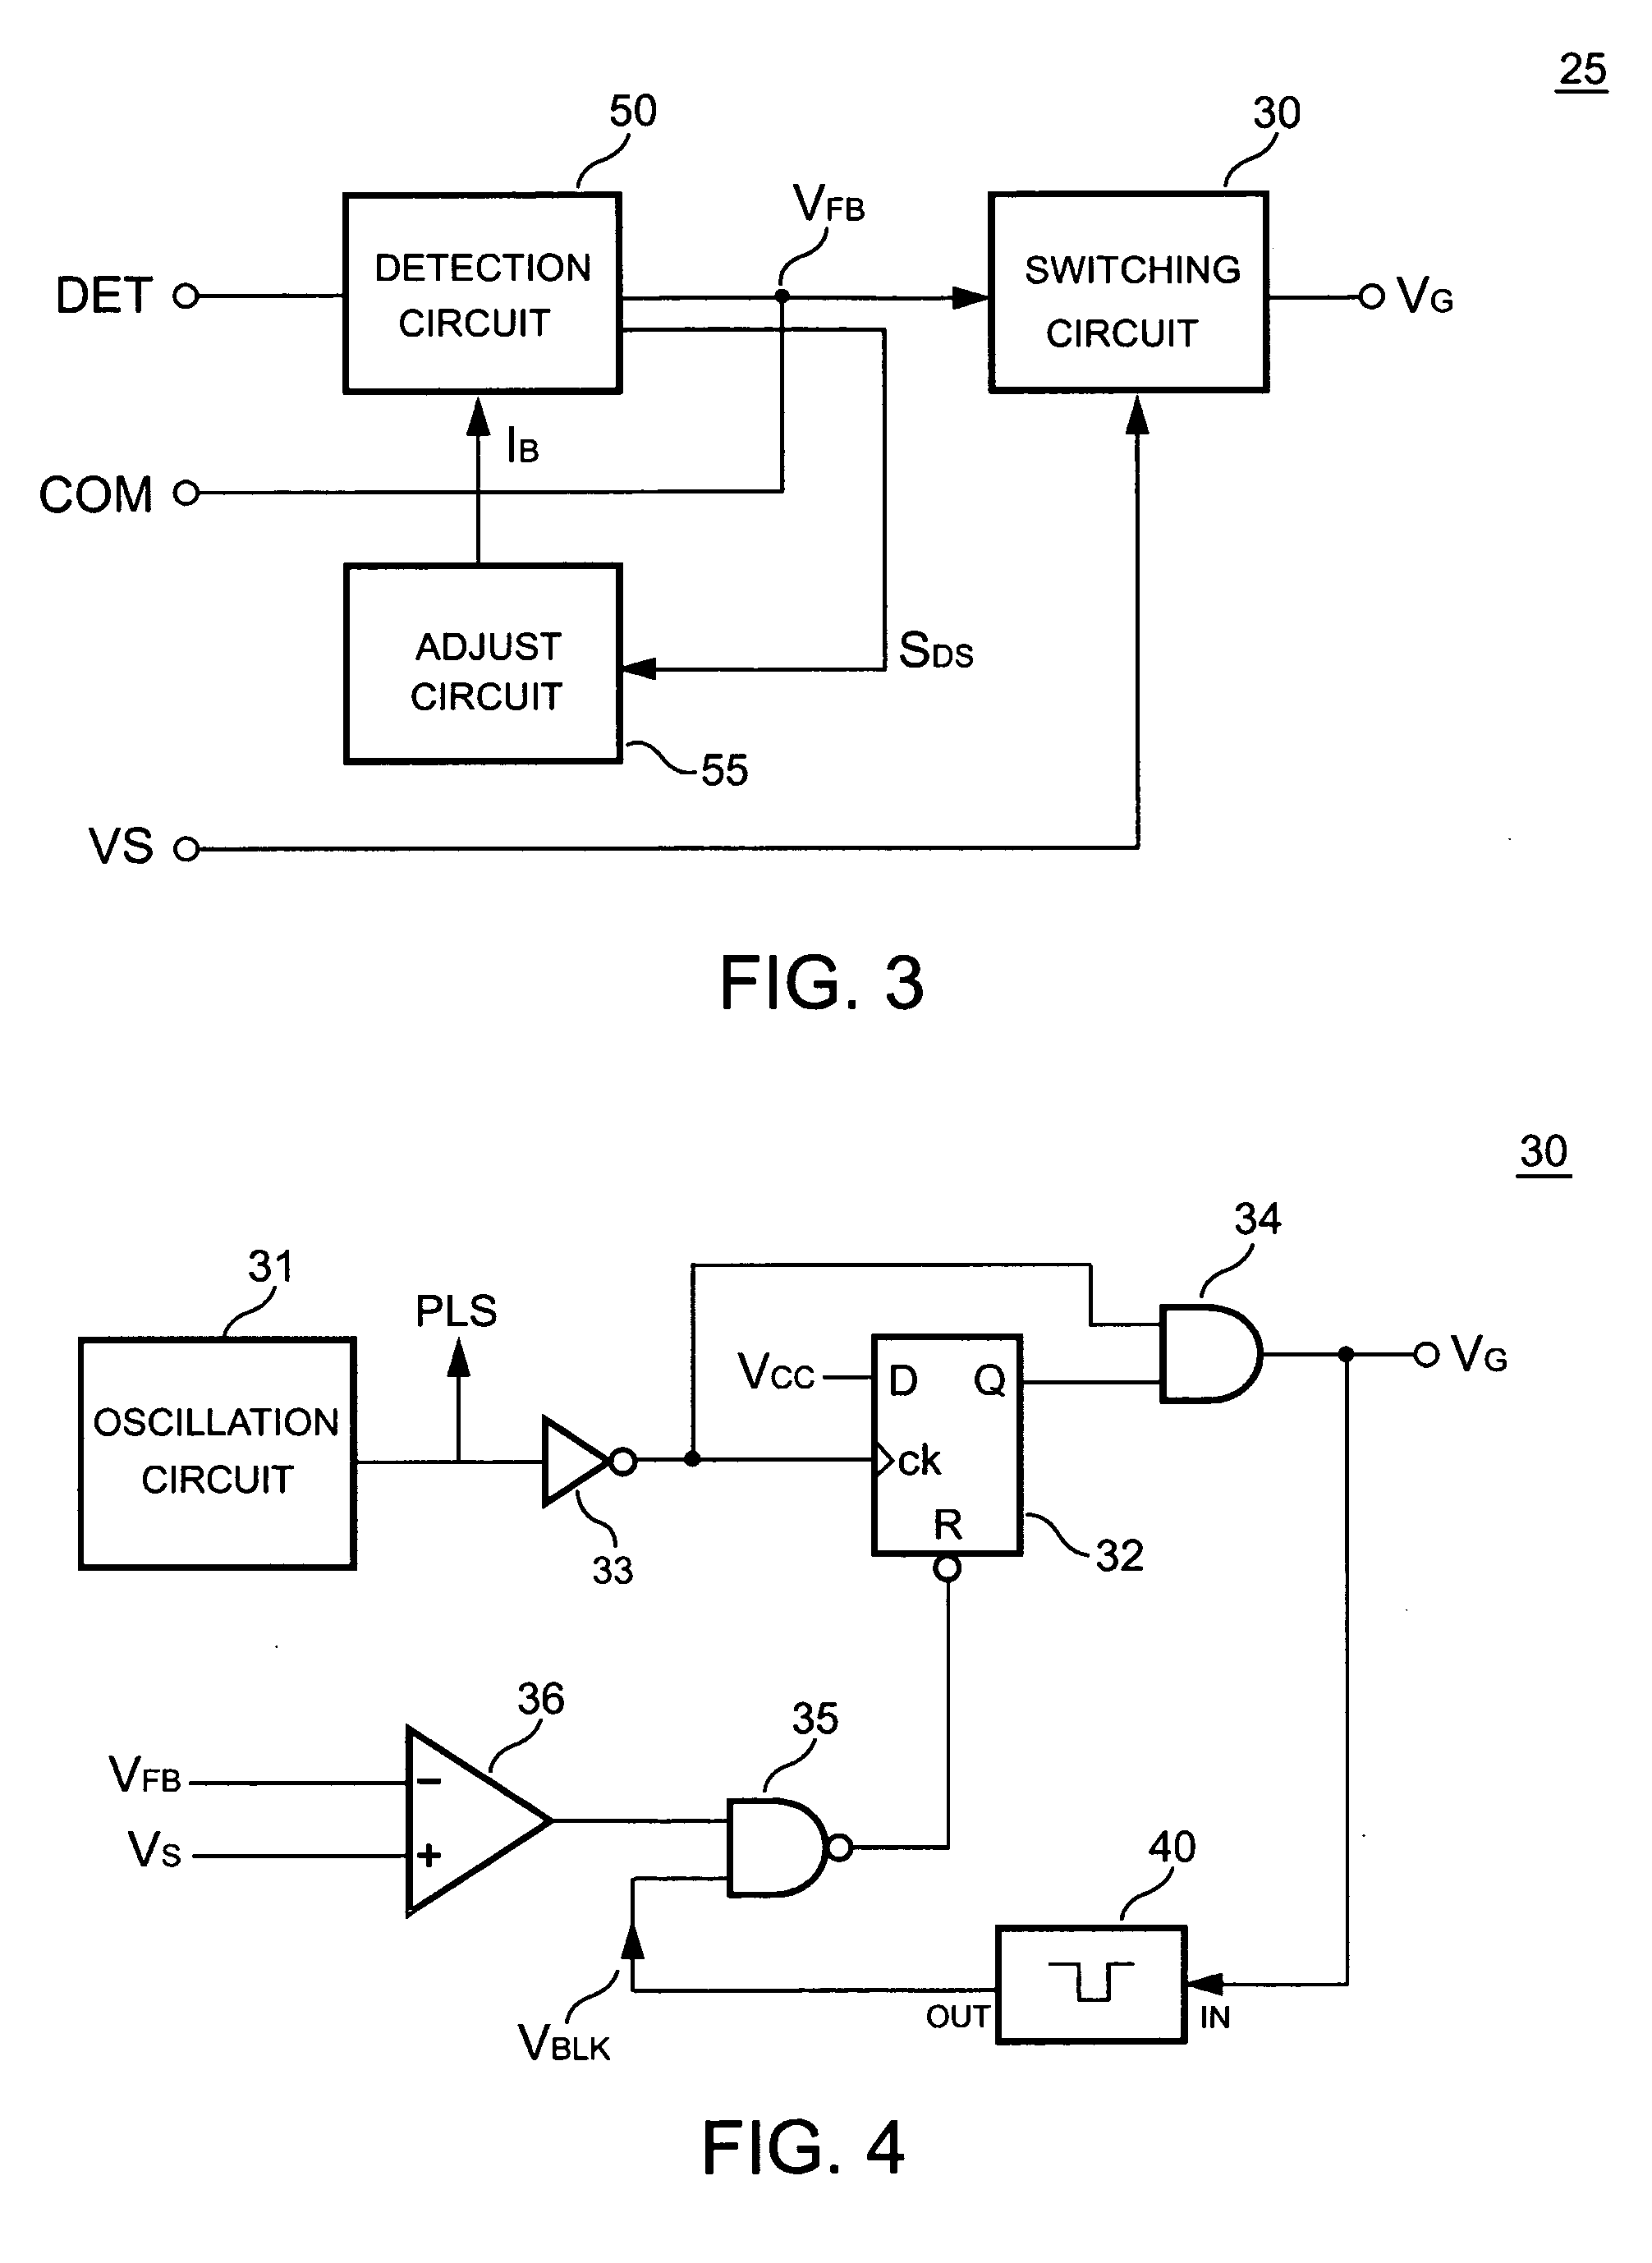 Control circuit including adaptive bias for transformer voltage detection of a power converter